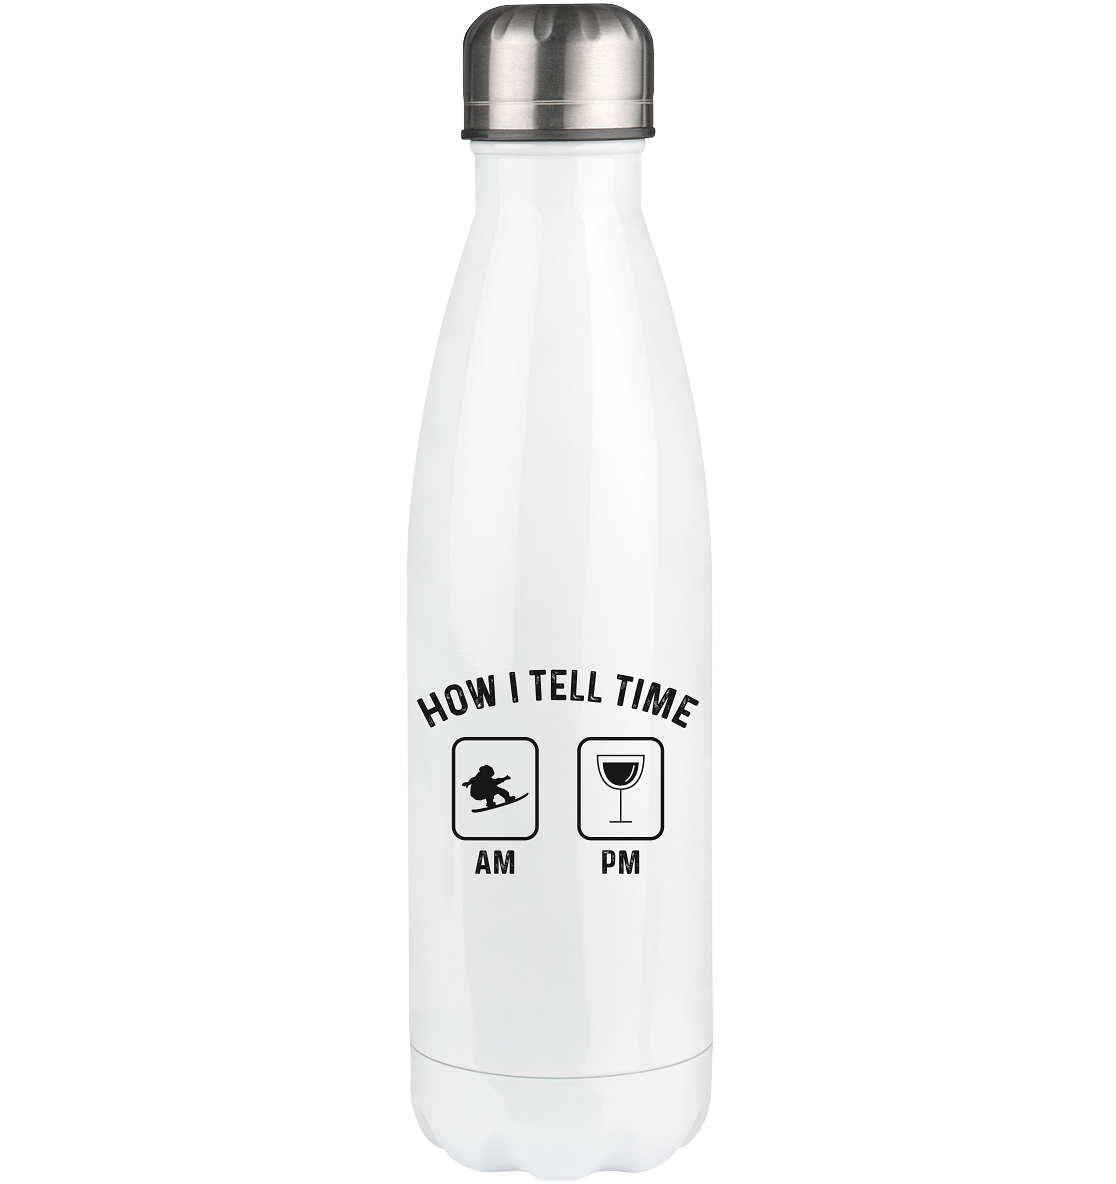 How I Tell Time Am Pm - Edelstahl Thermosflasche snowboarden 500ml